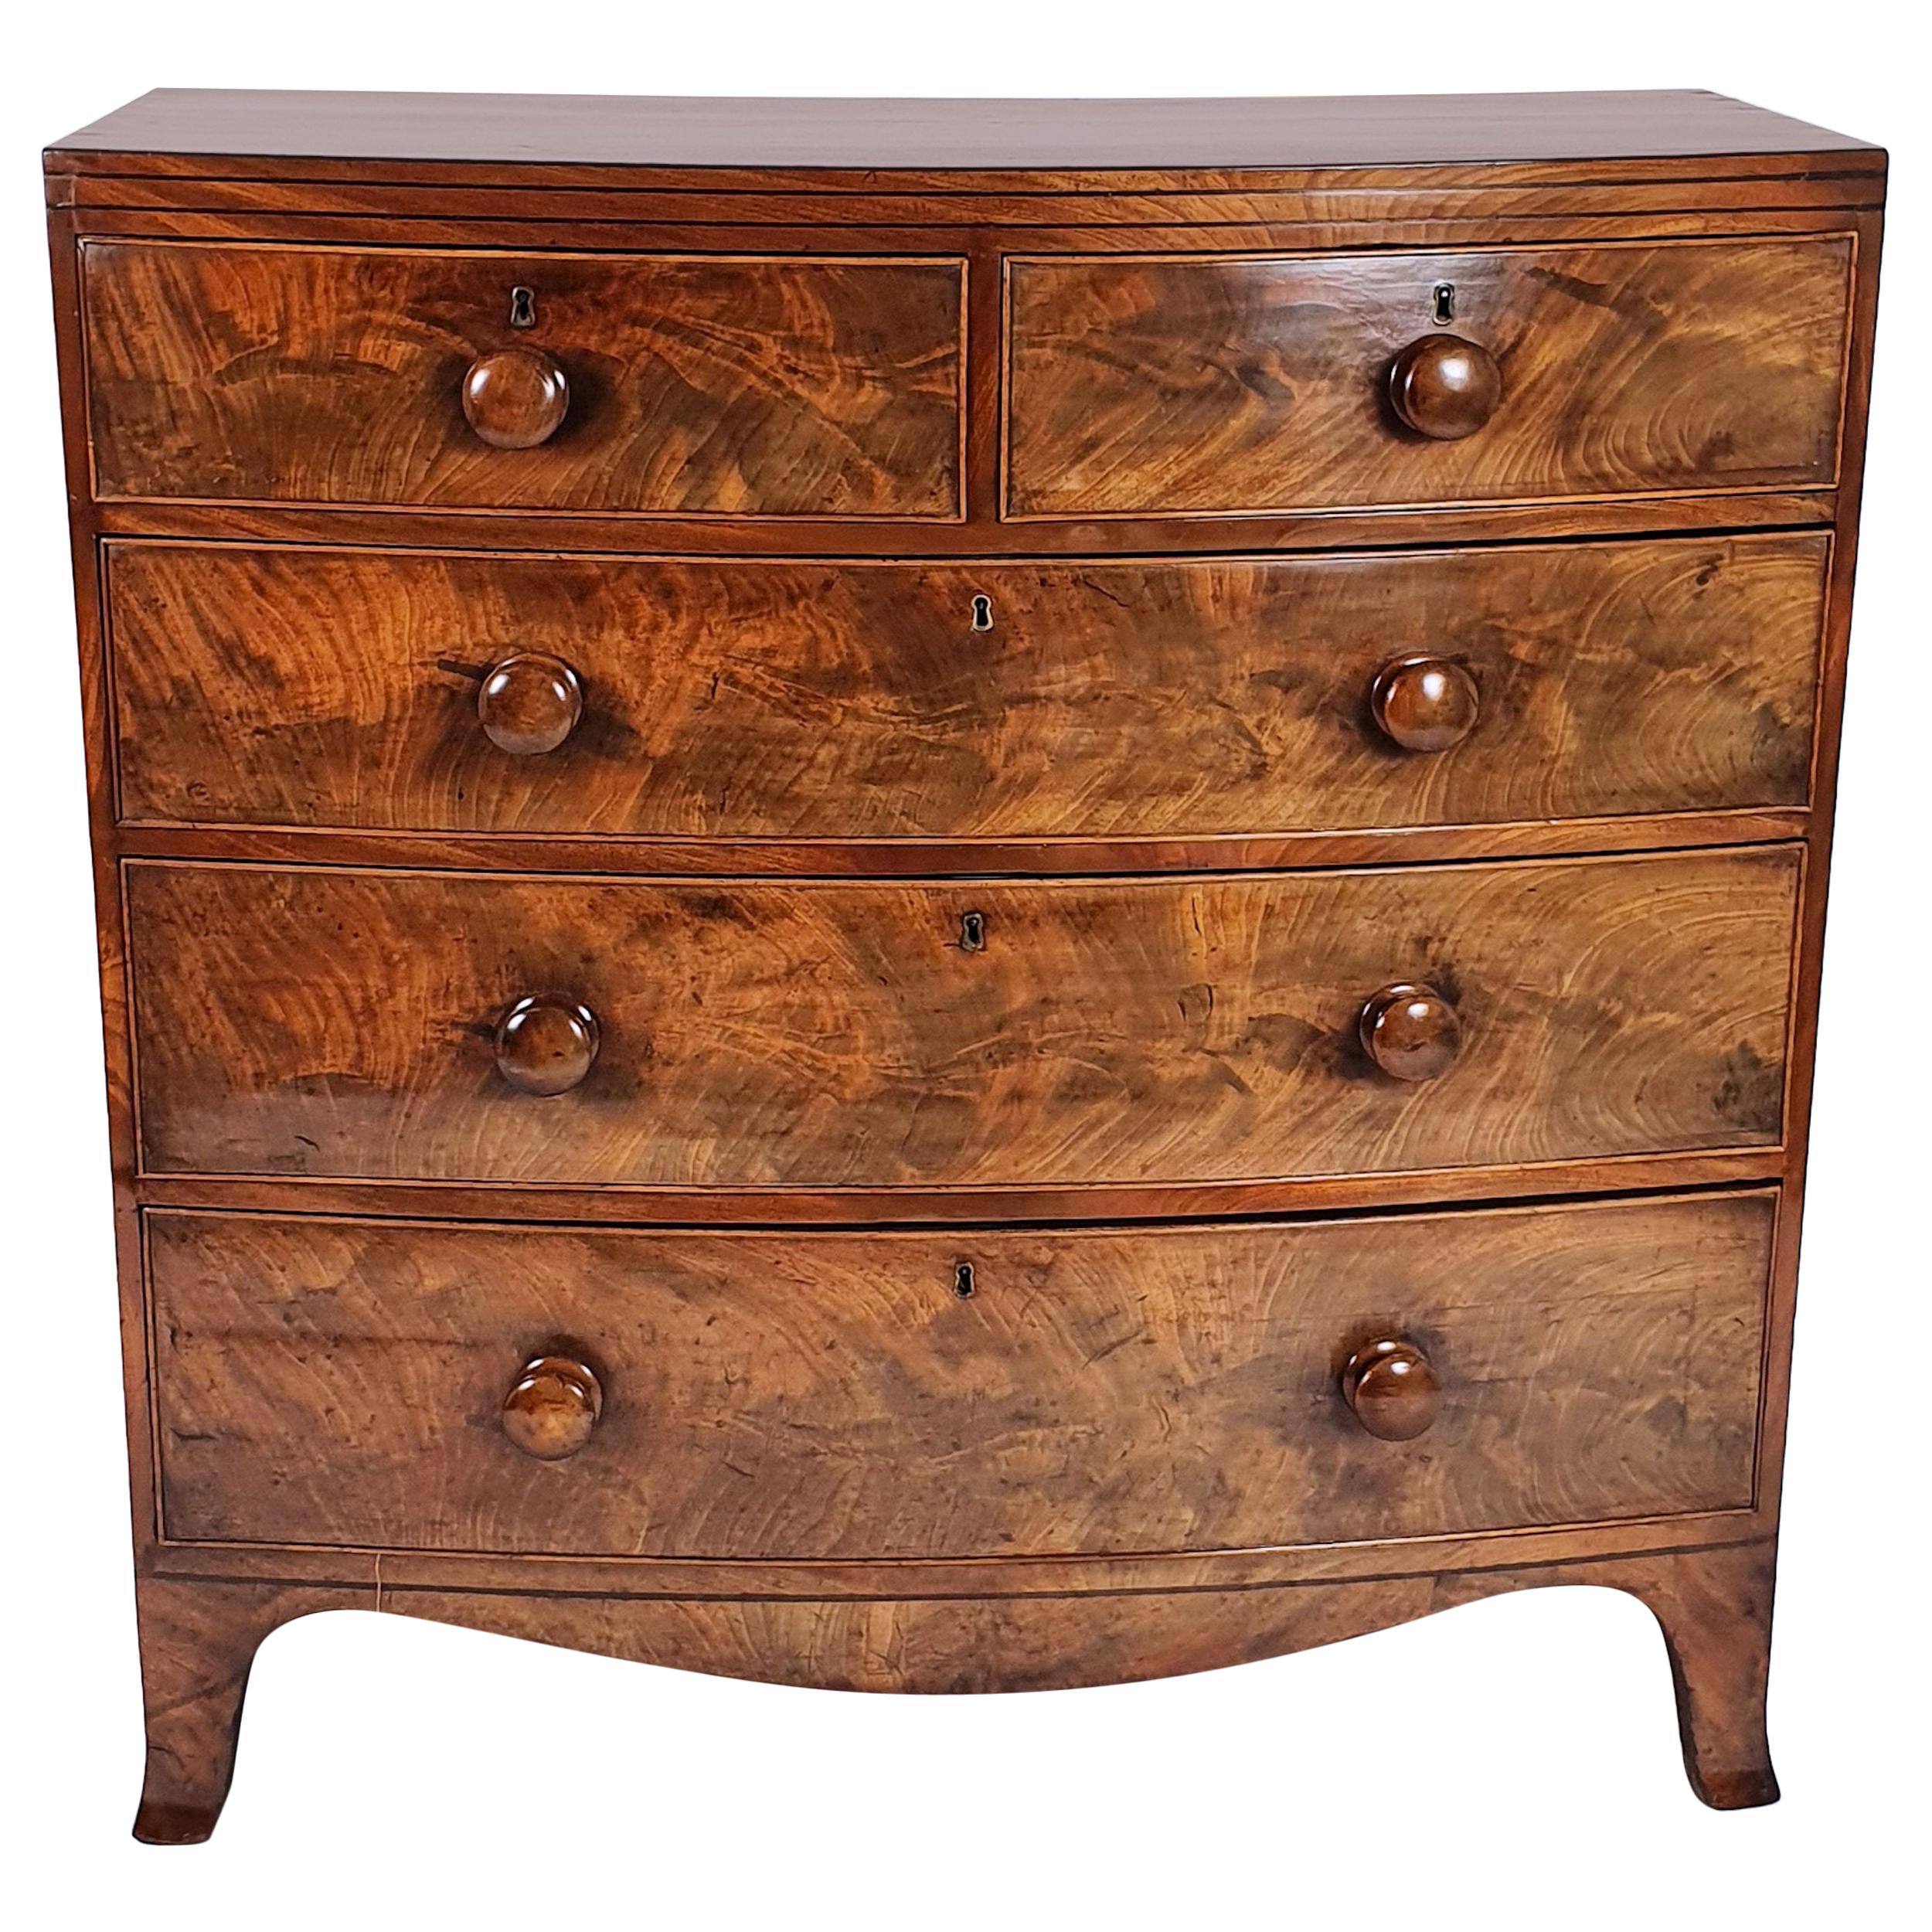 Early 19th Century English Flame Mahogany Bow Fronted Chest of Drawers